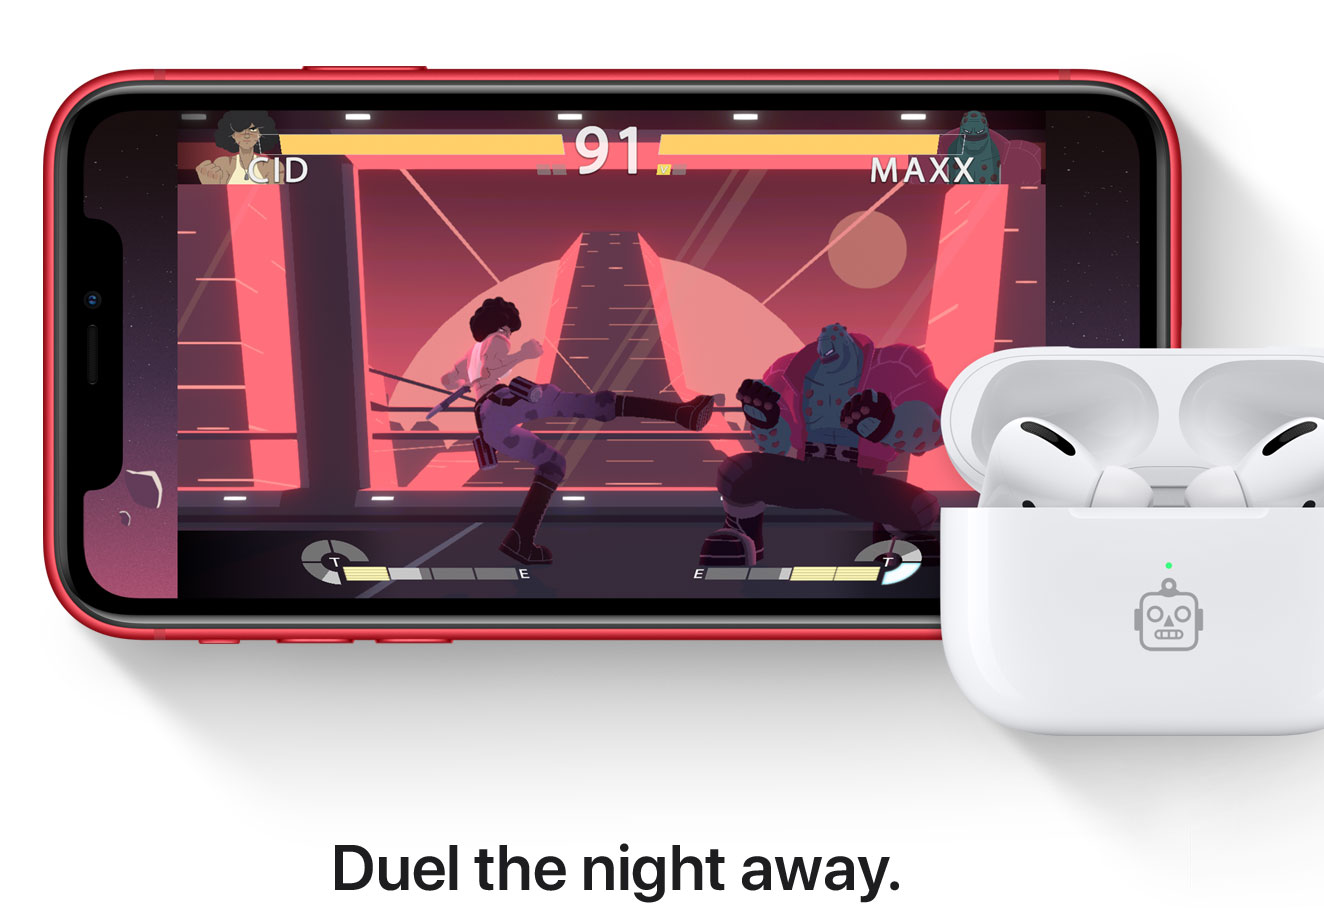 Duel the night away.